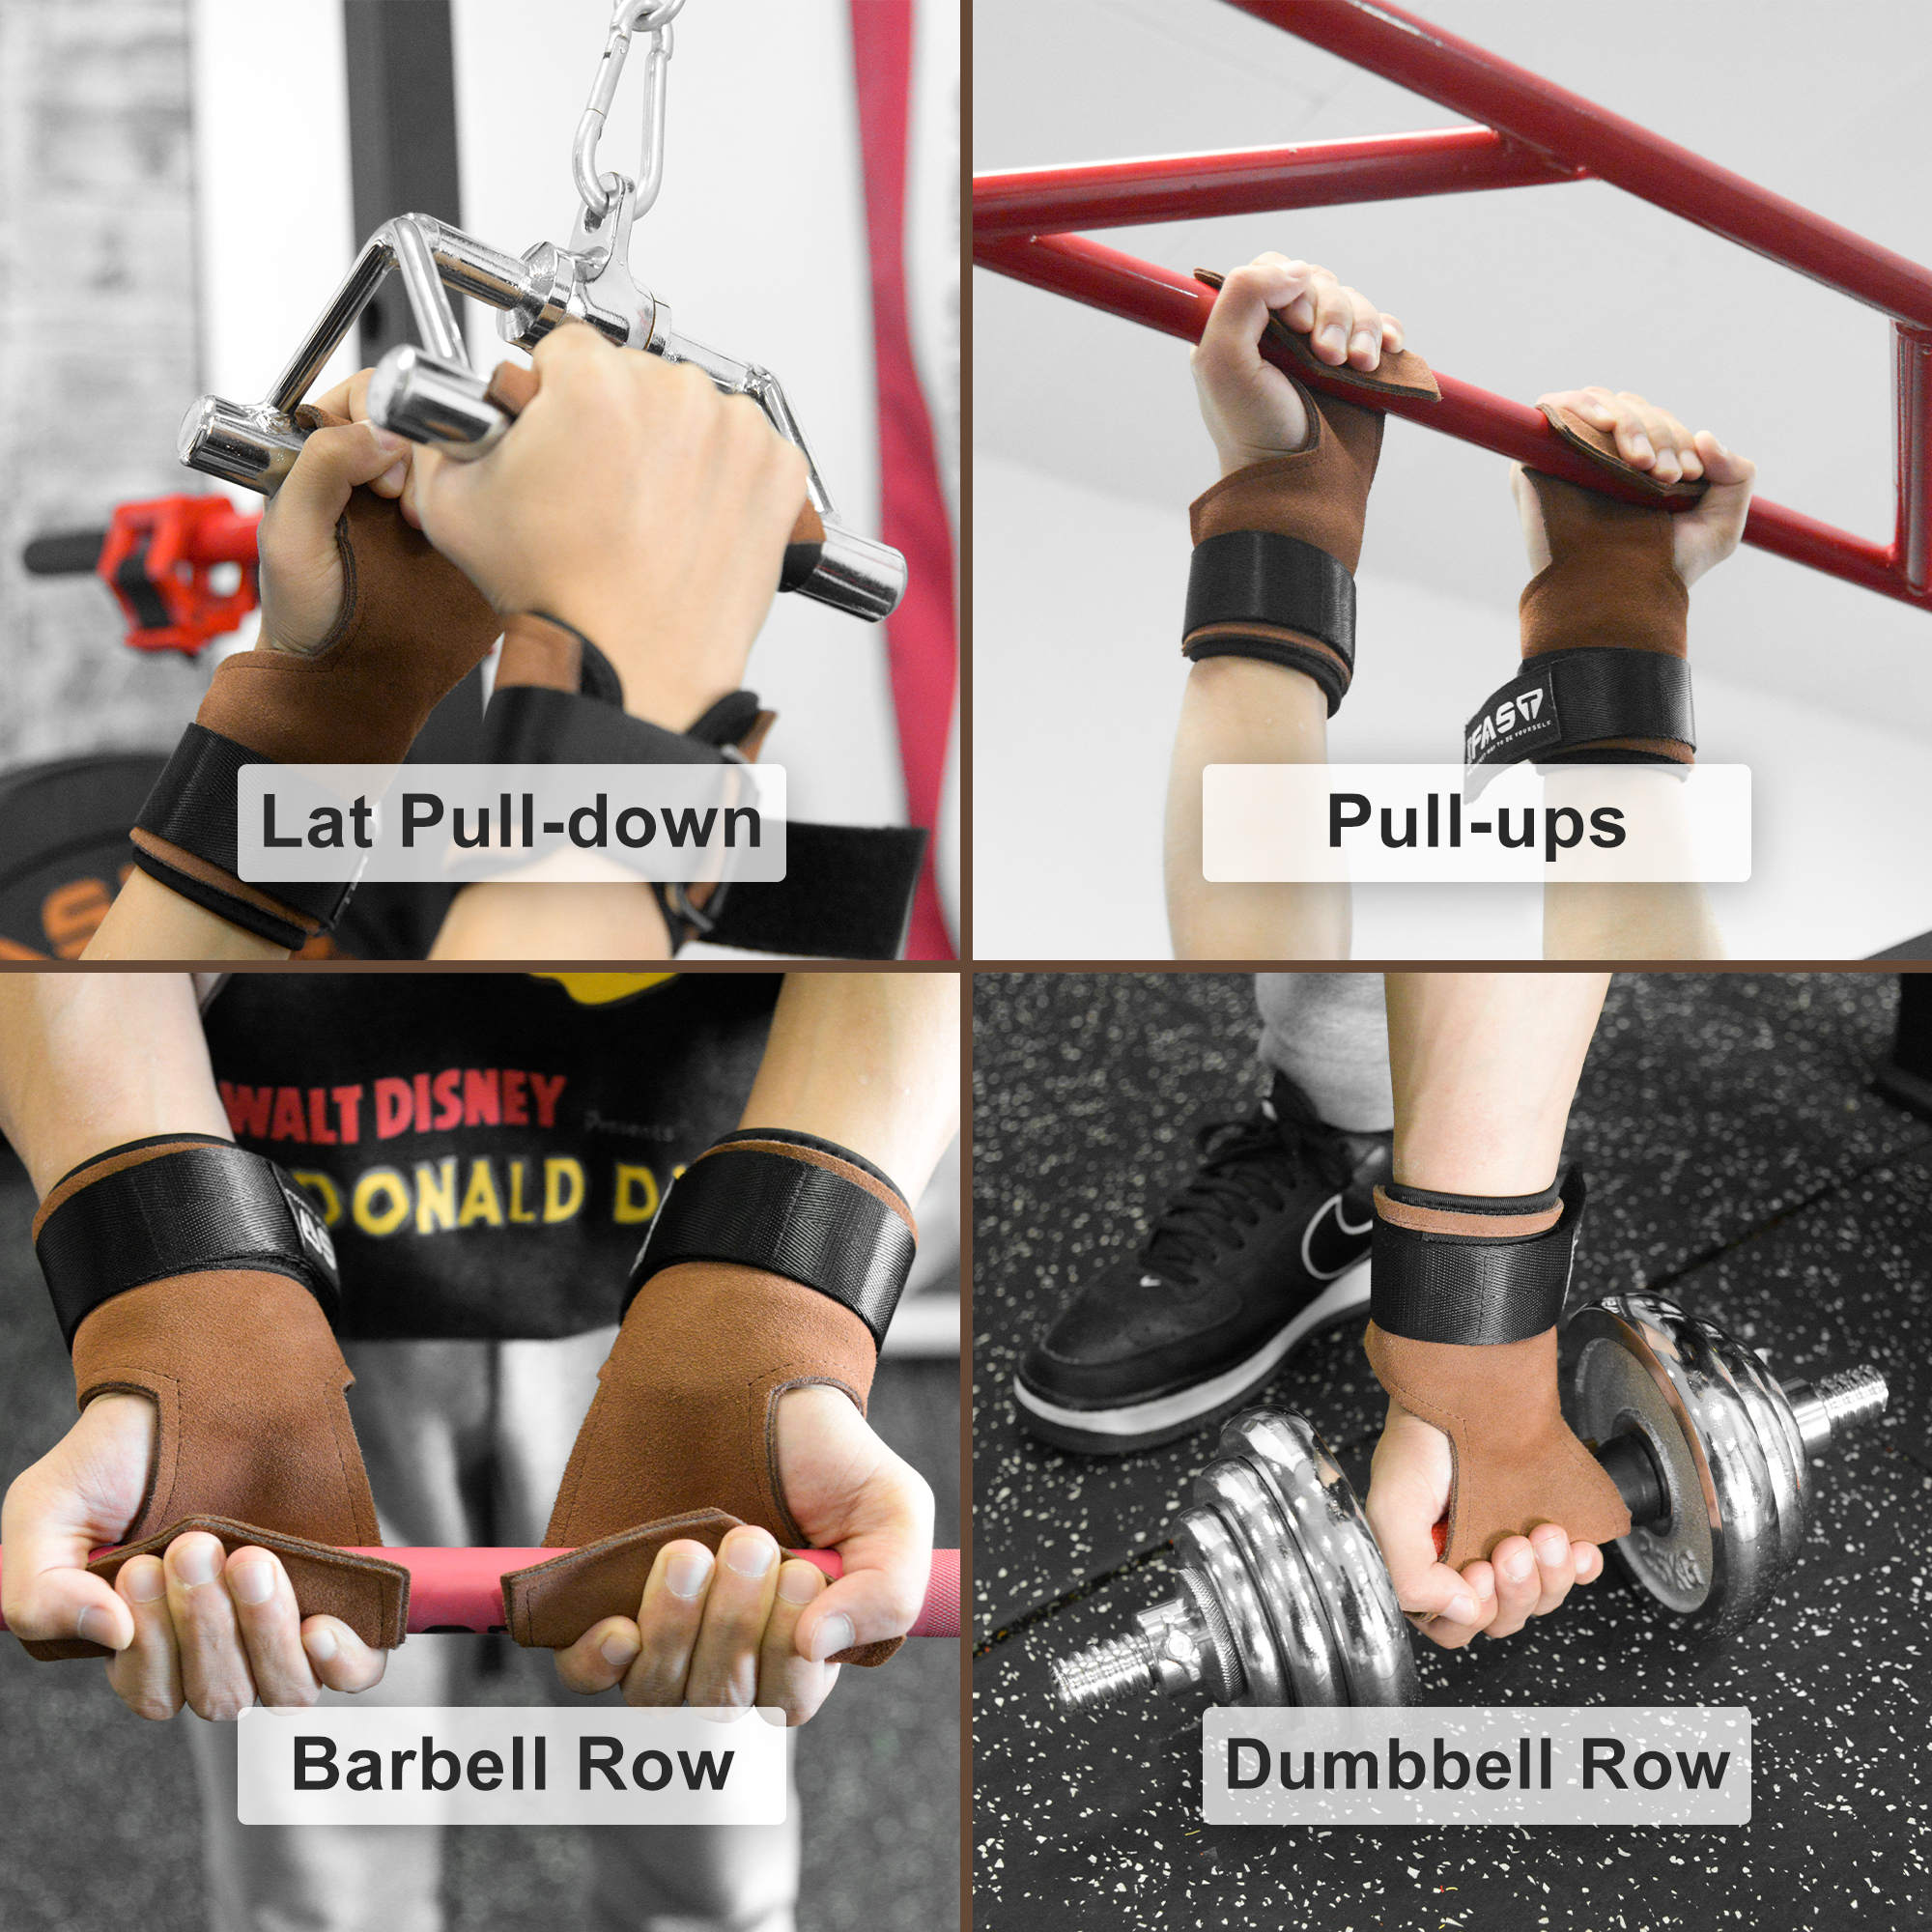 IFAST Weight Lifting Hooks